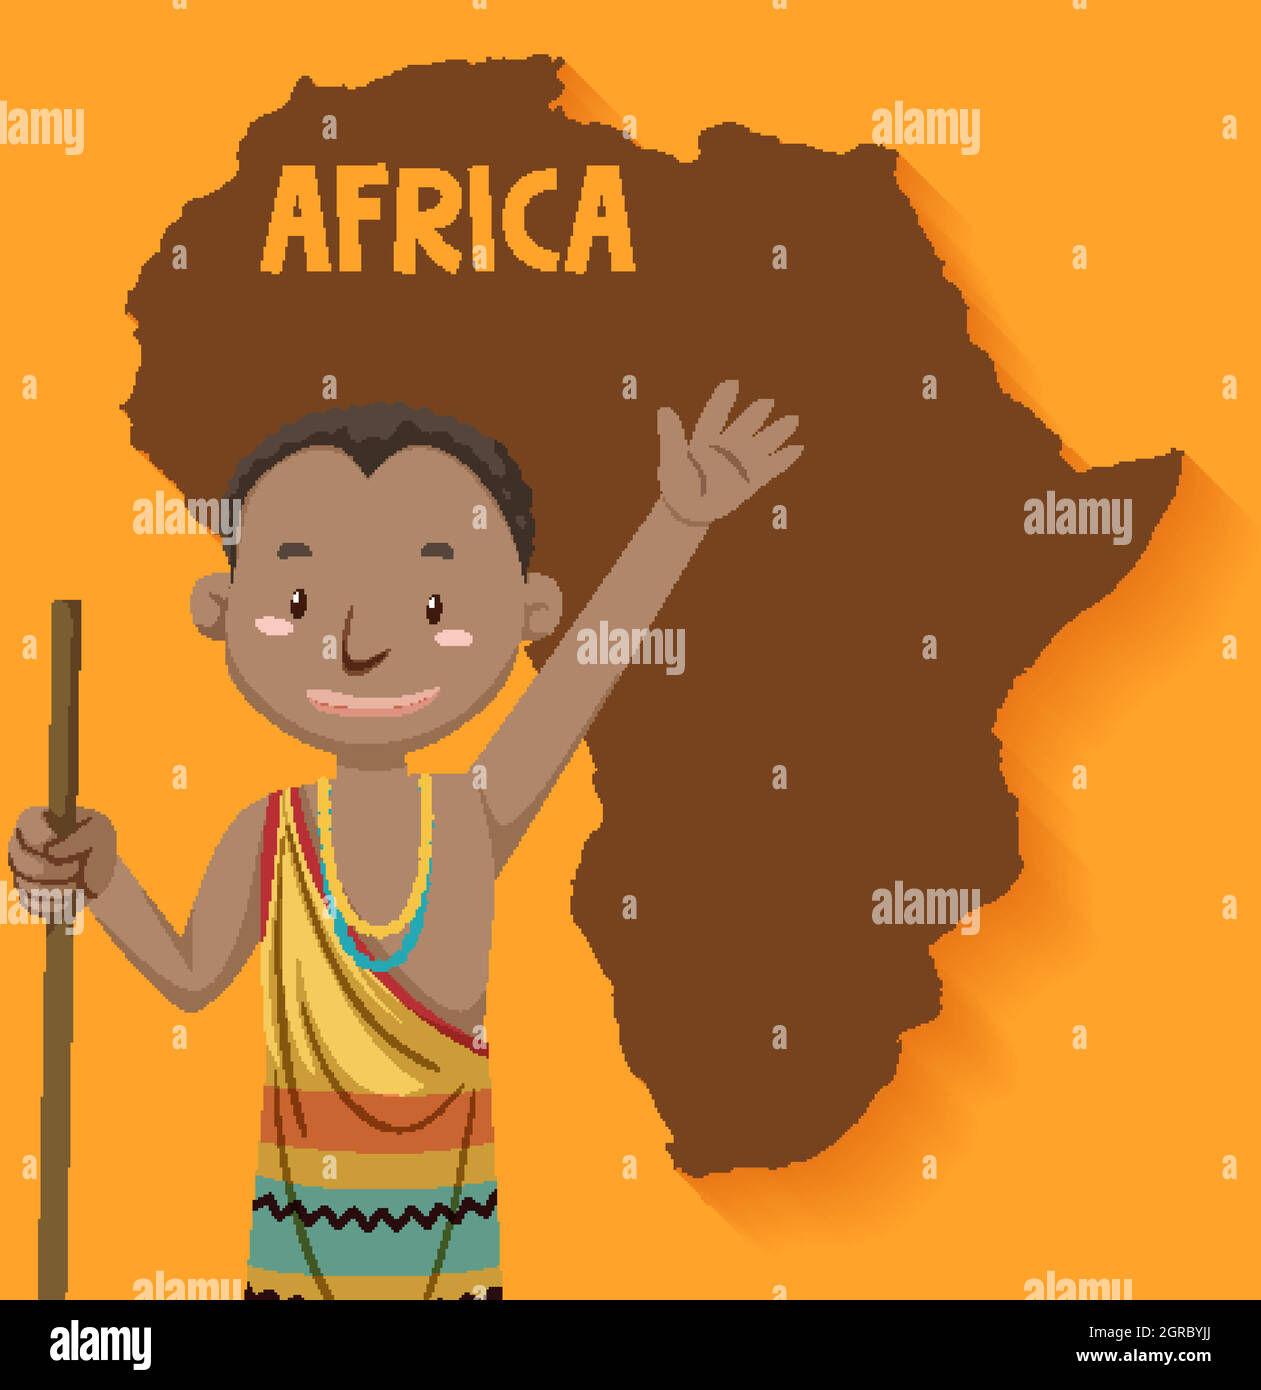 Native african tribes with map on the background Stock Vector